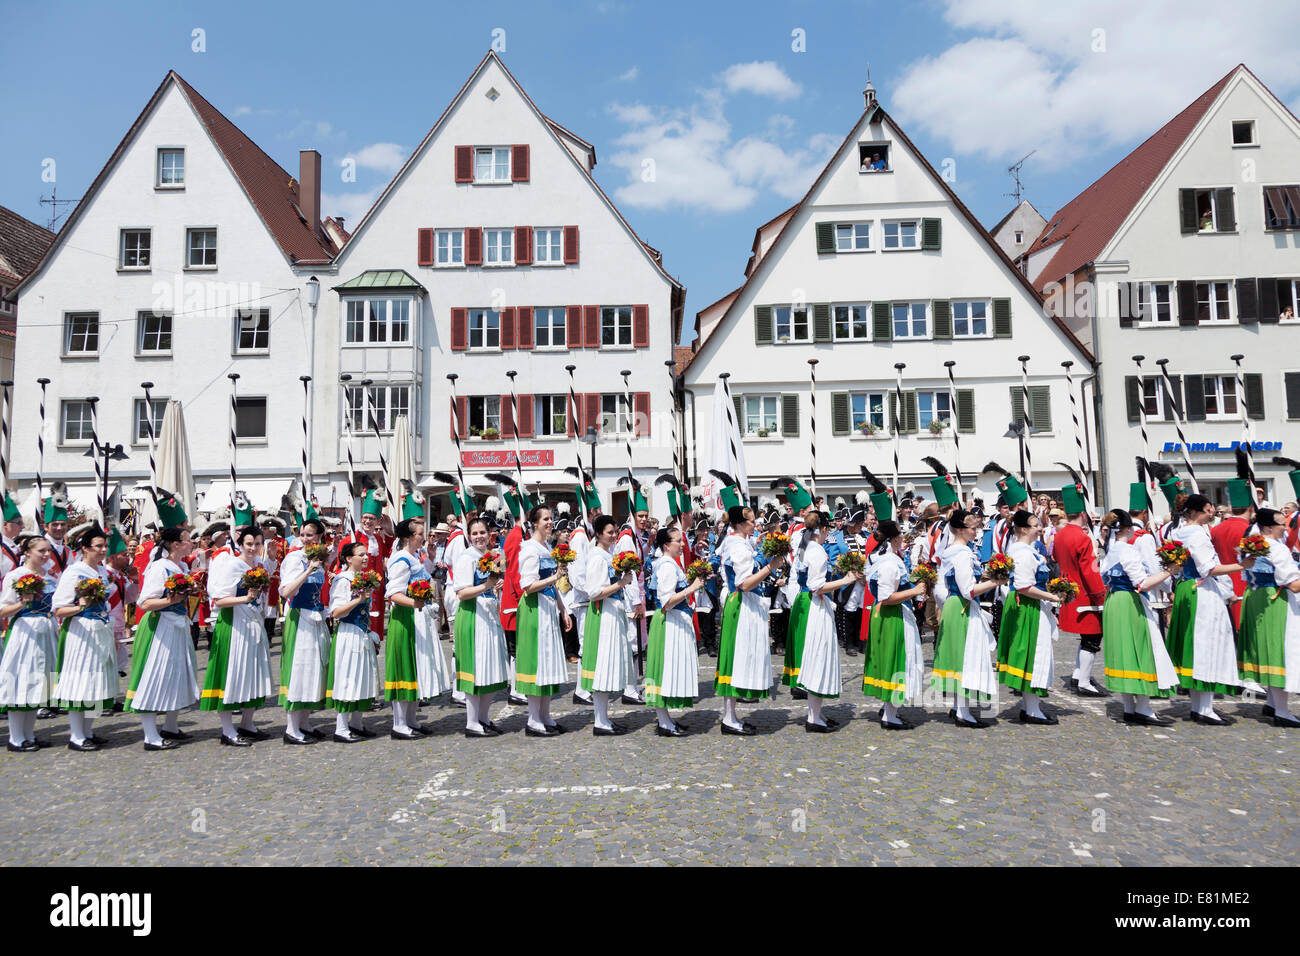 Menuettgruppe dance group with fishing girls and white fishermen during the fishing dance, Fischerstechen or water jousting Stock Photo